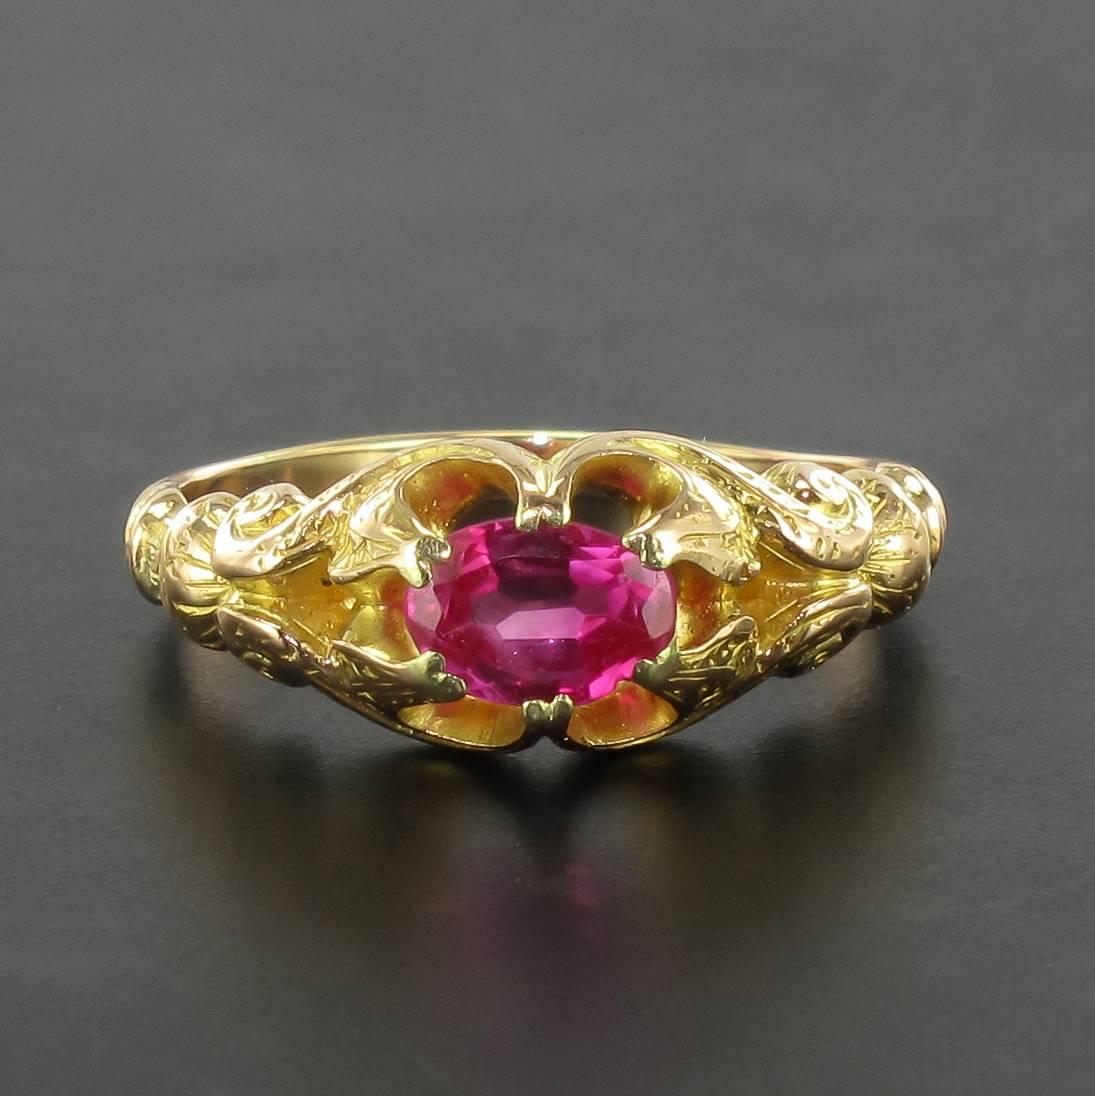 Ring in 18 carat yellow gold.

This lovely old ring is set with claws of an oval ruby. The whole ring is chiseled original and easy to wear.

Total ruby weight: about 0.50 carat.
Height: 7,40 mm, thickness: 3,70 mm, width of the ring at the